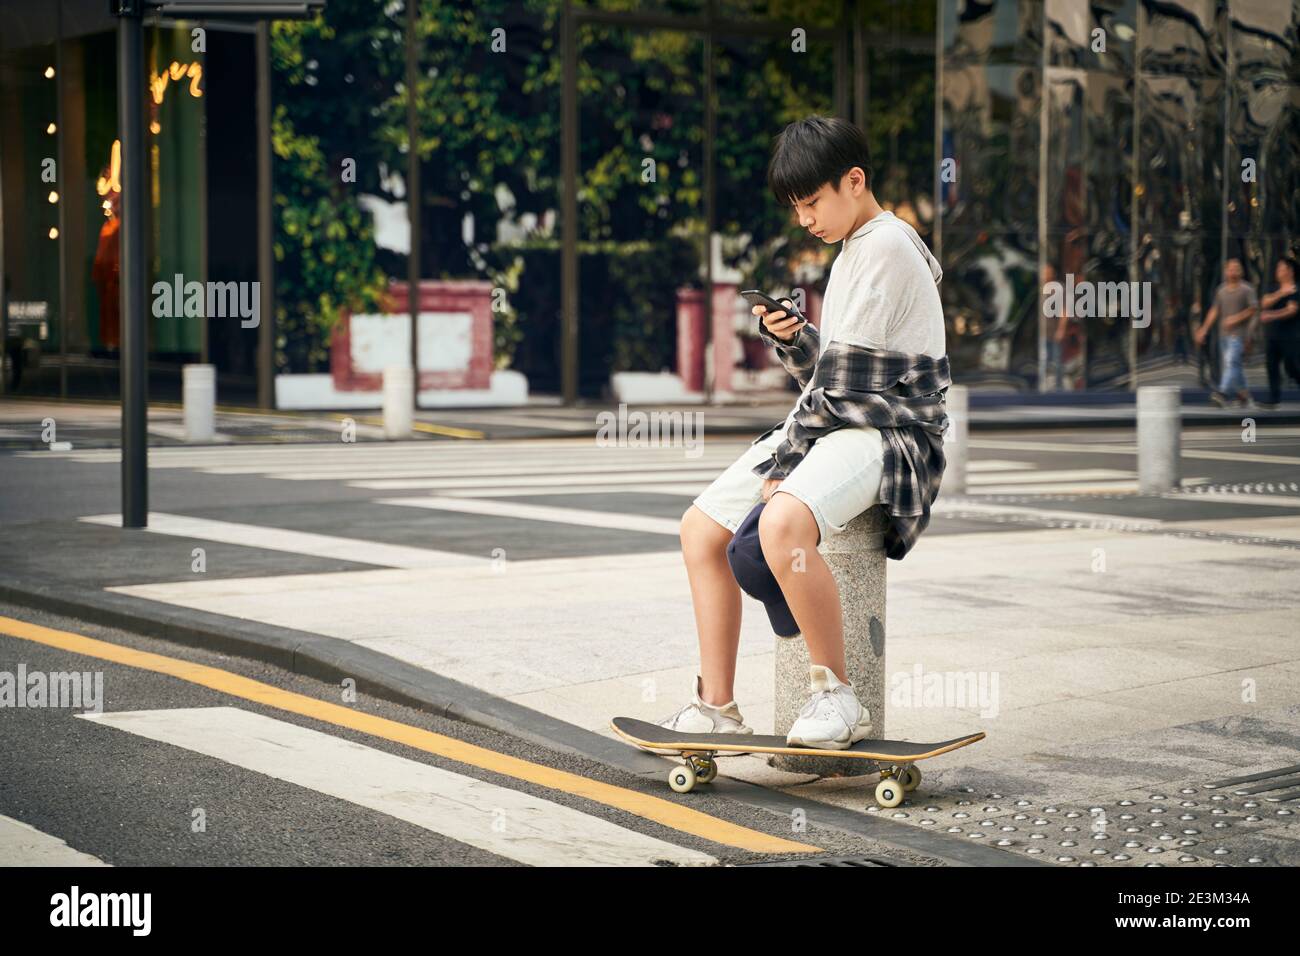 teenage asian skateboarder kid looking at mobile phone while resting Stock Photo